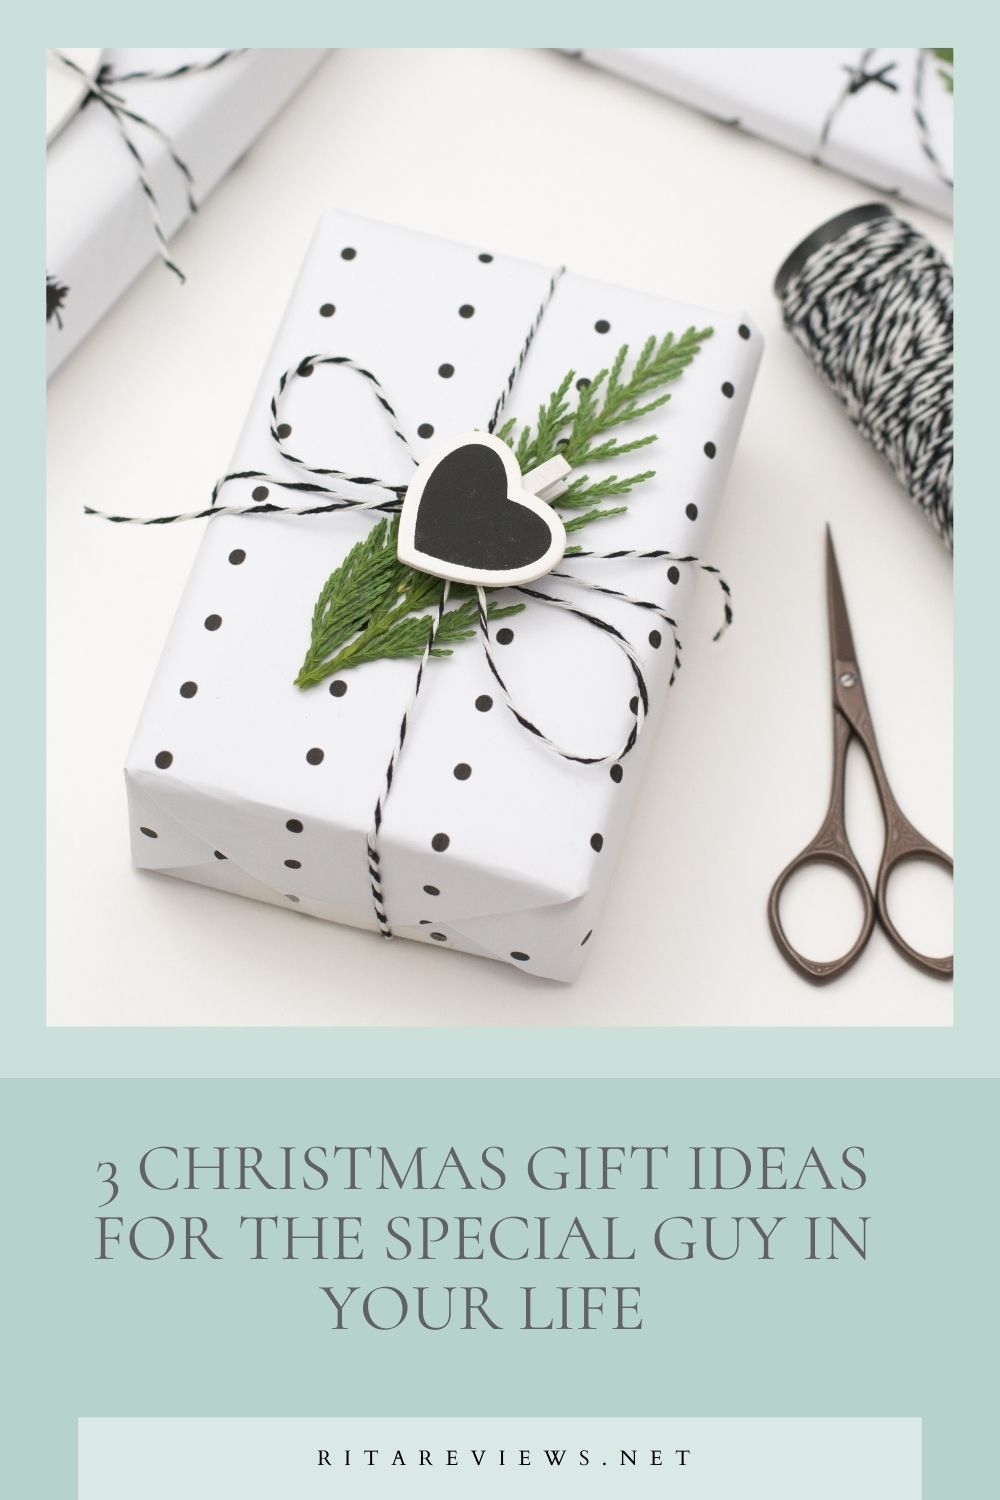 3 Christmas Gift Ideas for the Special Guy in Your Life